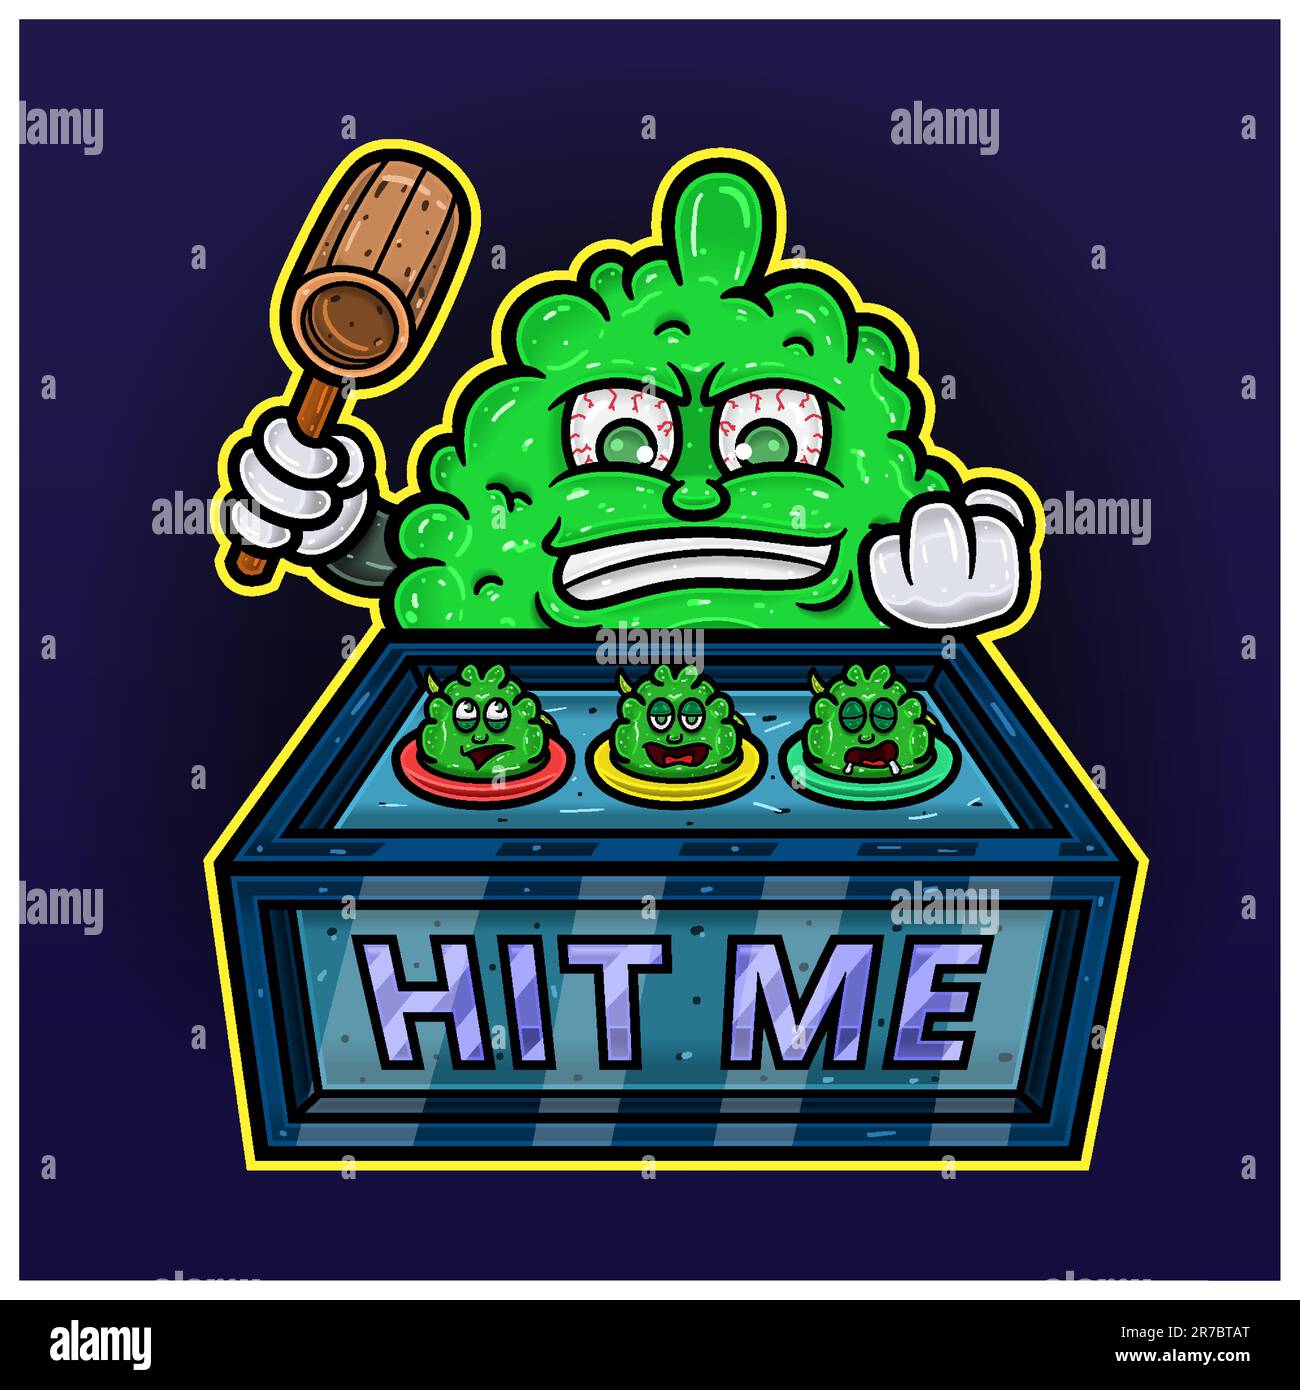 Cartoon Mascot Of Weed Bud Holding Hammer and Punch Machine Game. Perfect For Label, Cover, Packaging, and Product Design. Vectors and Illustrations. Stock Vector